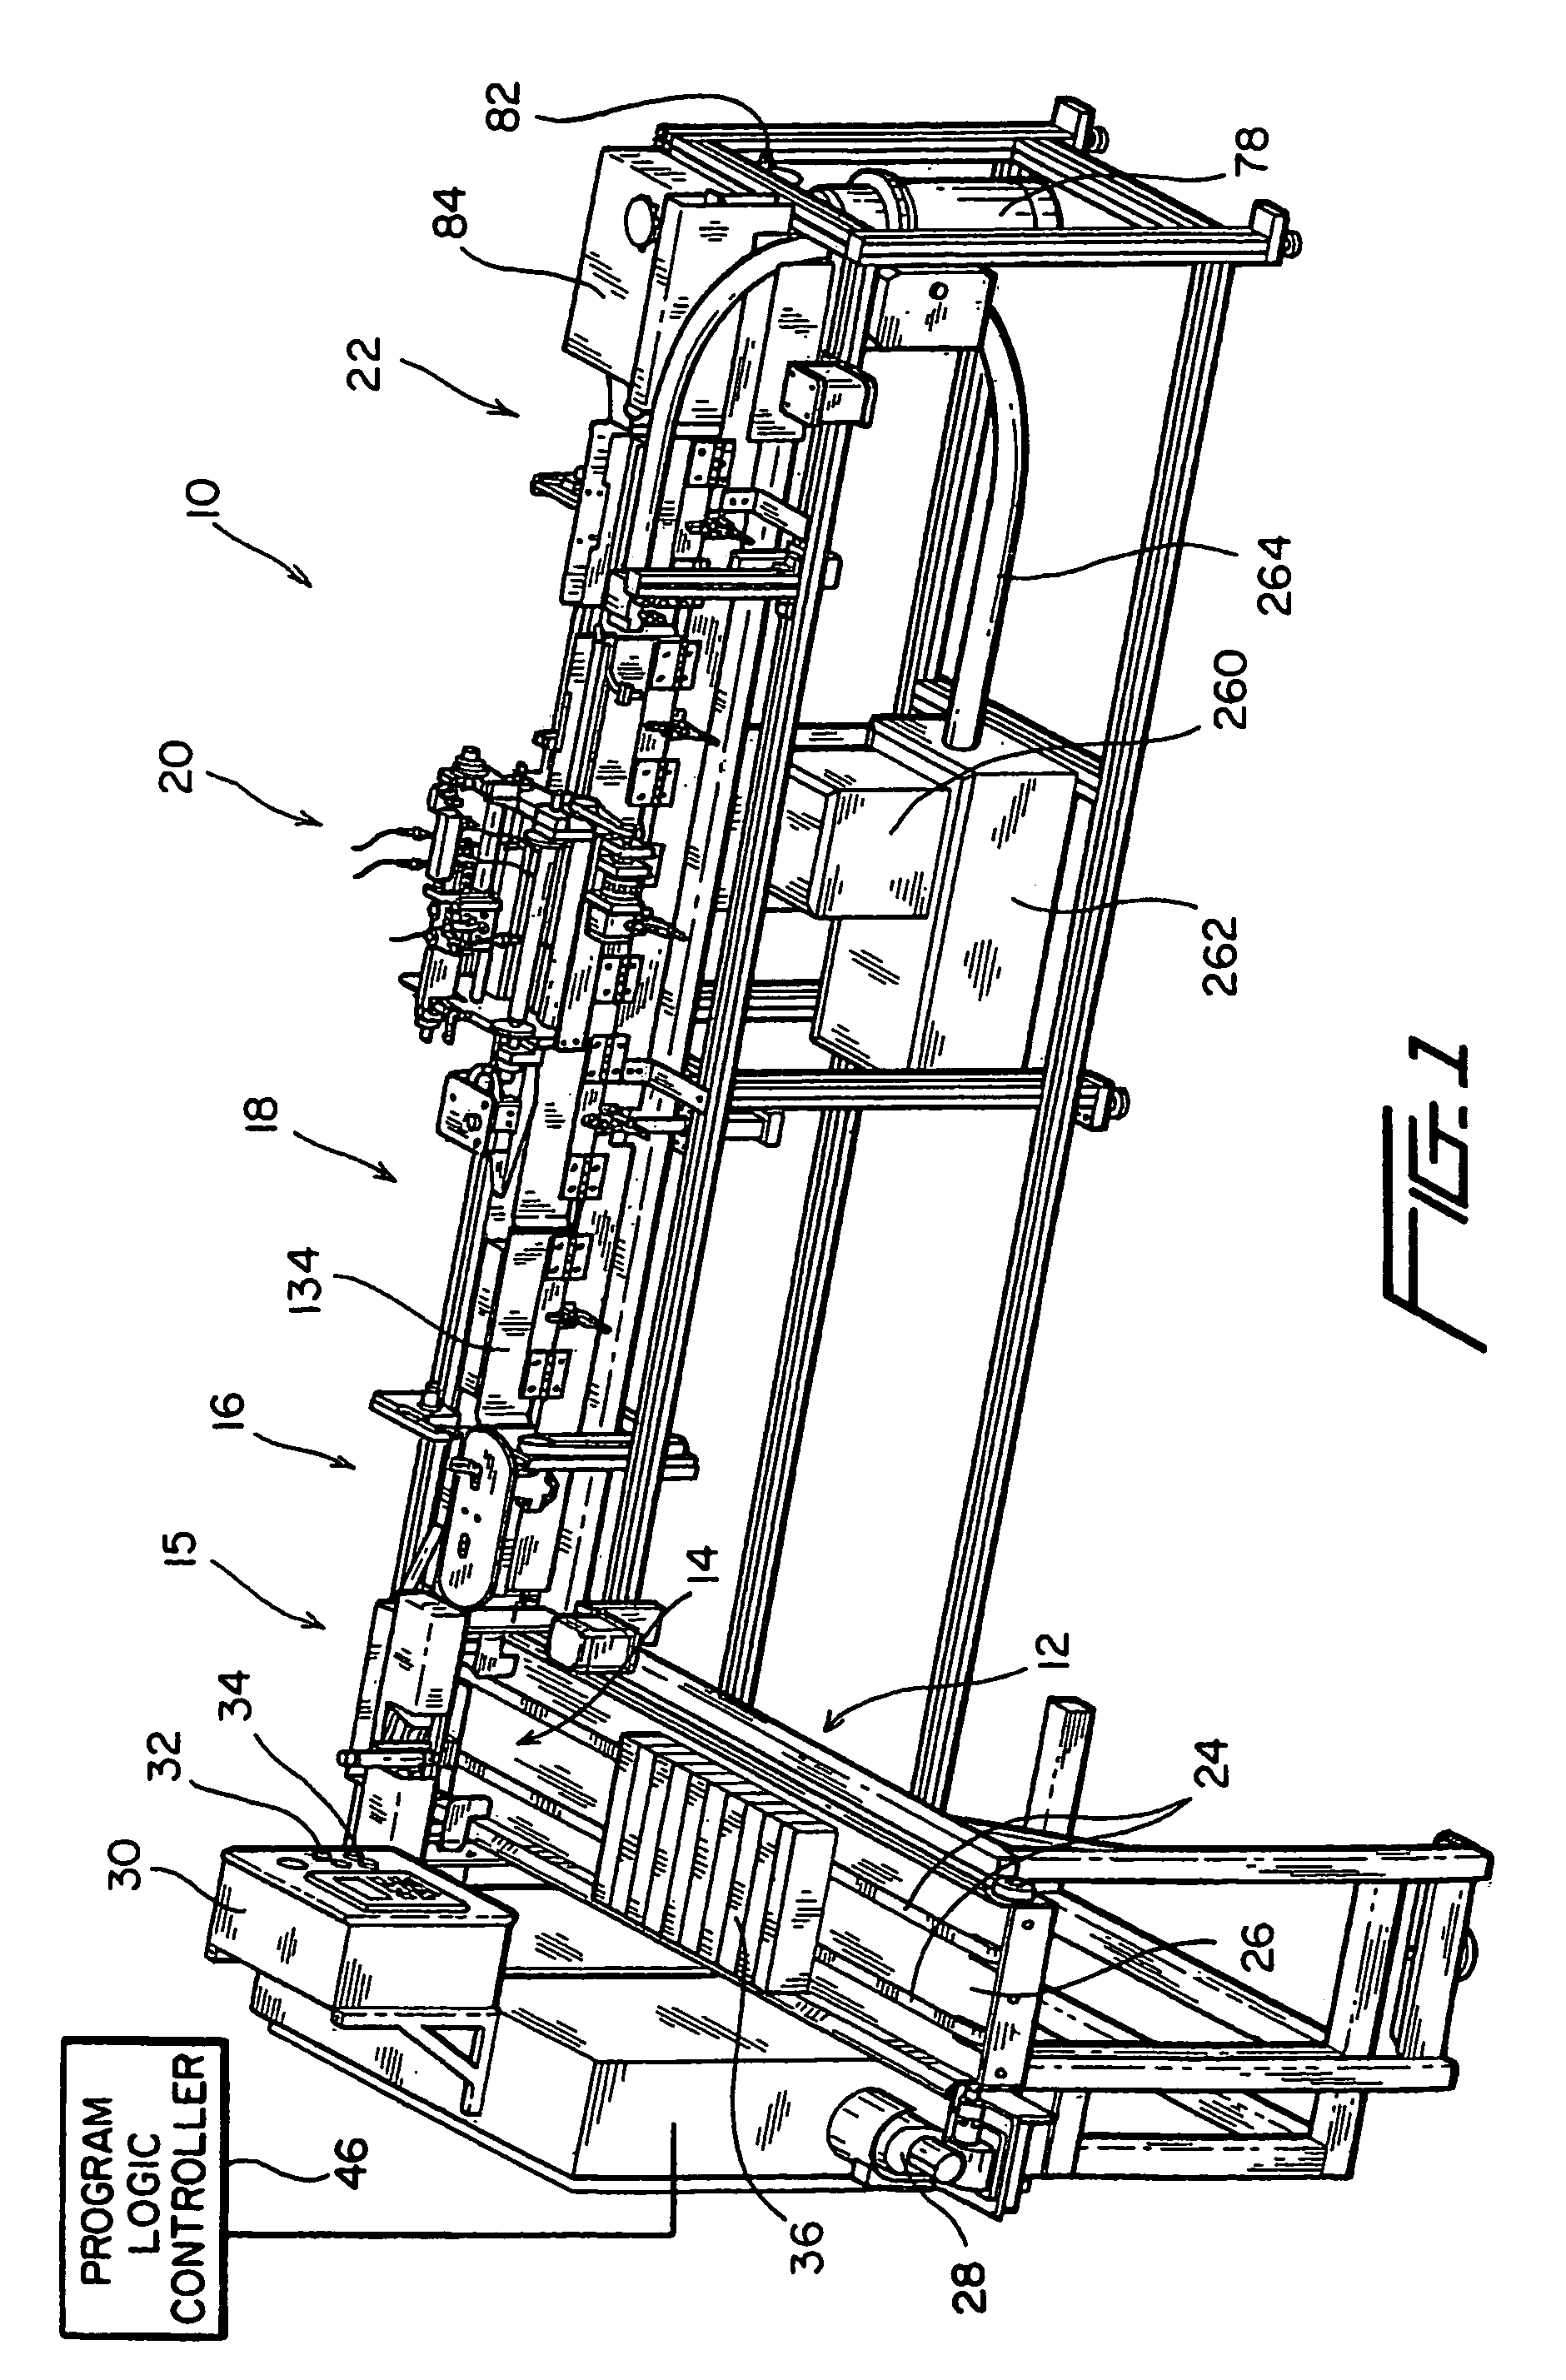 Synchronized stamp applicator machine and method of operating the same